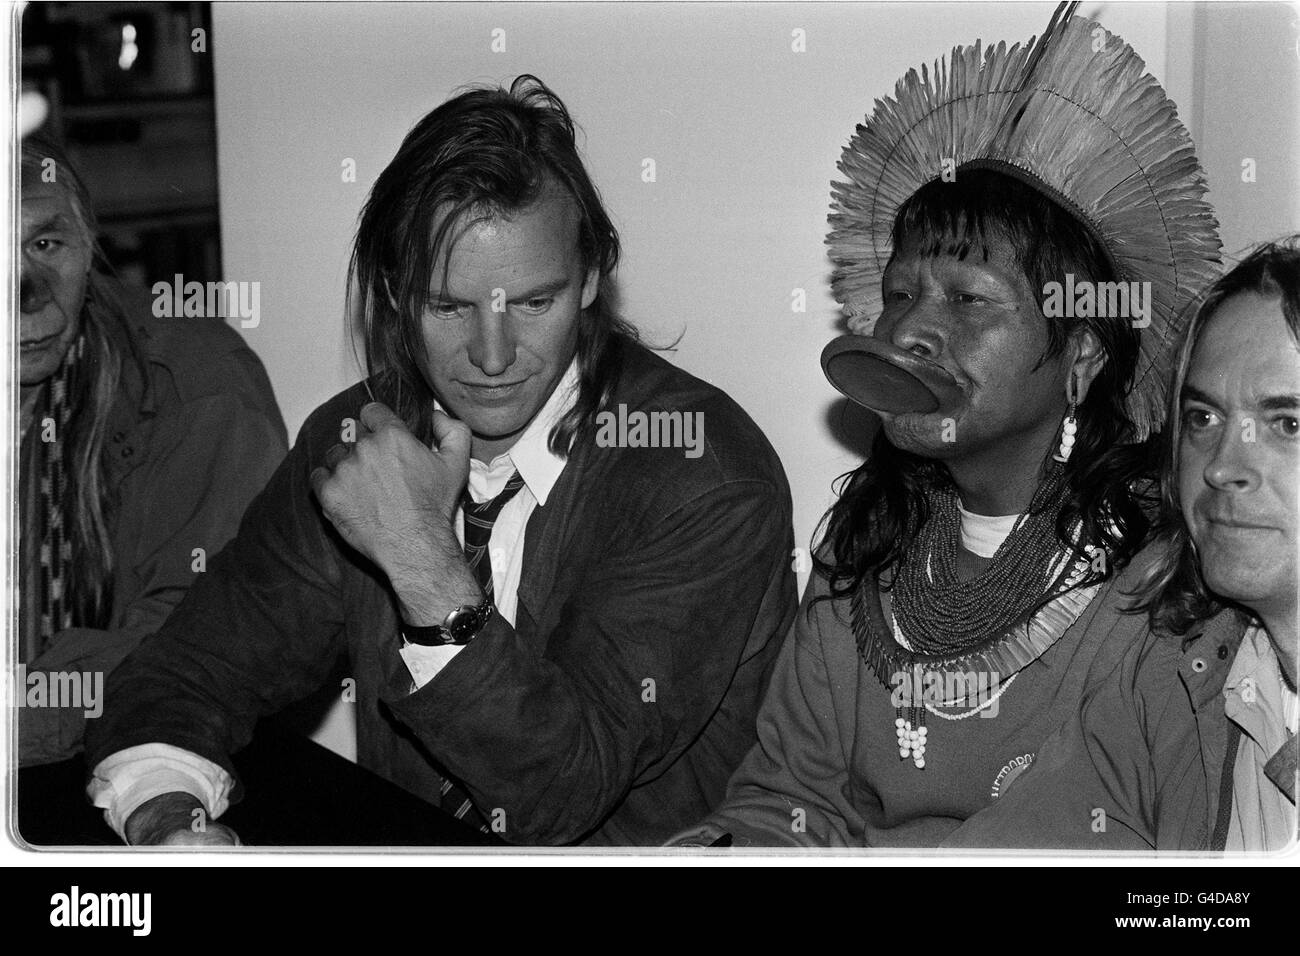 PA NEWS PHOTO 28/4/89 ROCK STAR STING WITH KAYAPO INDIAN CHIEF RAONI AT A LONDON BOOKSHOP WHERE THEY SIGNED COPIES OF 'JUNGLE STORIES - THE FIGHT FOR THE AMAZON'. THE PAIR ARE TOURING EUROPE ON A CAMPAIGN TO TRY AND HALT THE DESTRUCTION OF AMAZONIA. ROYALTIES FROM SALES OF THE BOOK WILL GO TO THE RAINFOREST FOUNDATION. Stock Photo